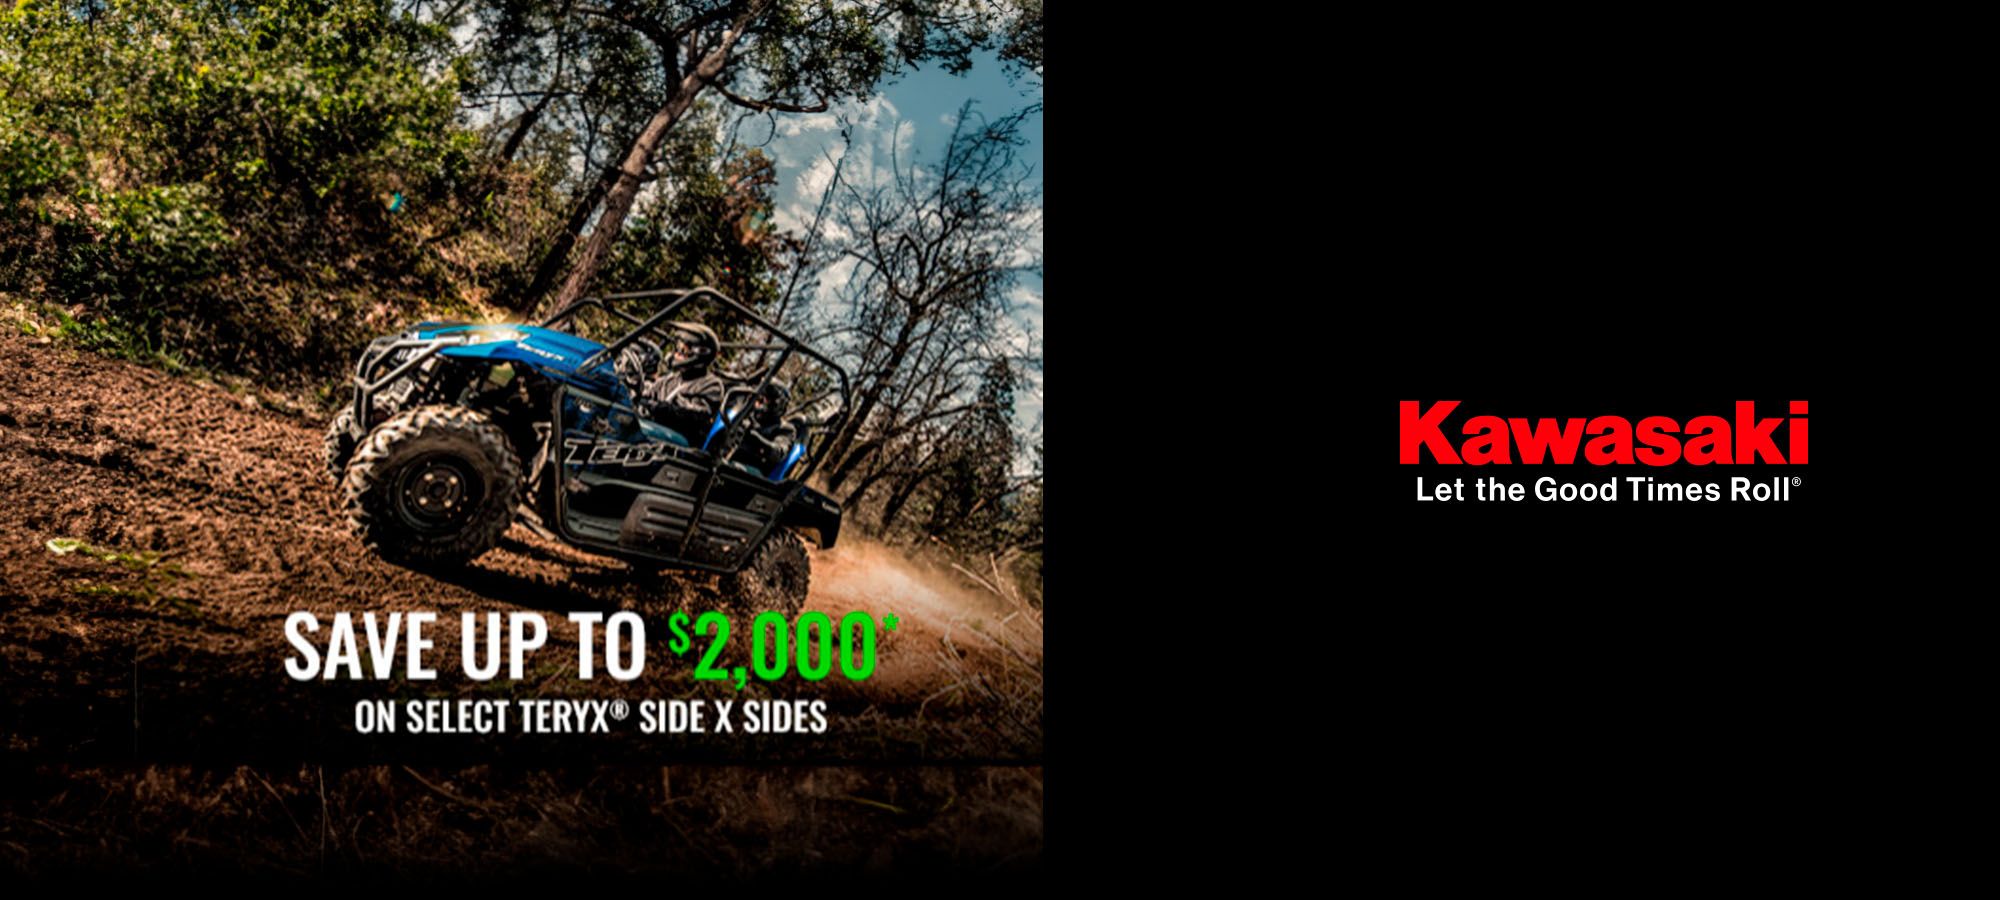 Kawasaki US - Save Up to $2,000* On Select Side X Sides at Friendly Powersports Slidell